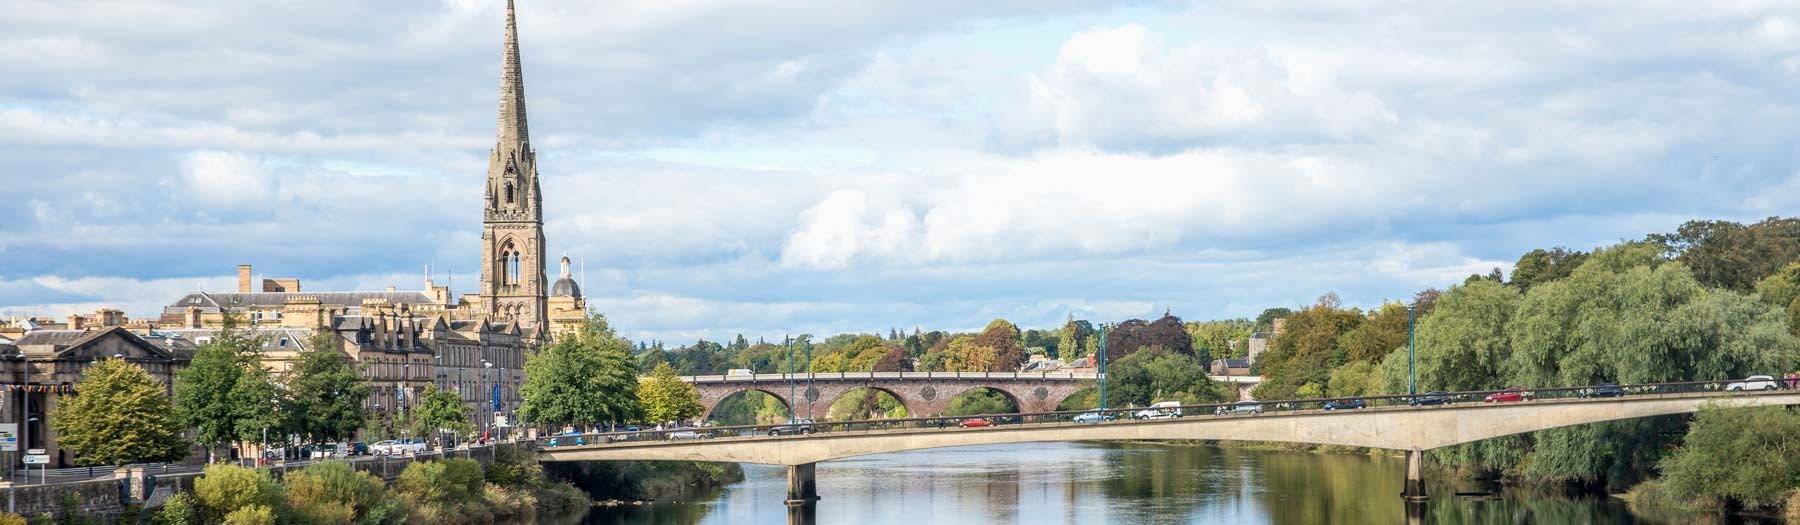 Image: Perth and the River Tay. Credit: Image republished with kind permission of VisitScotland.